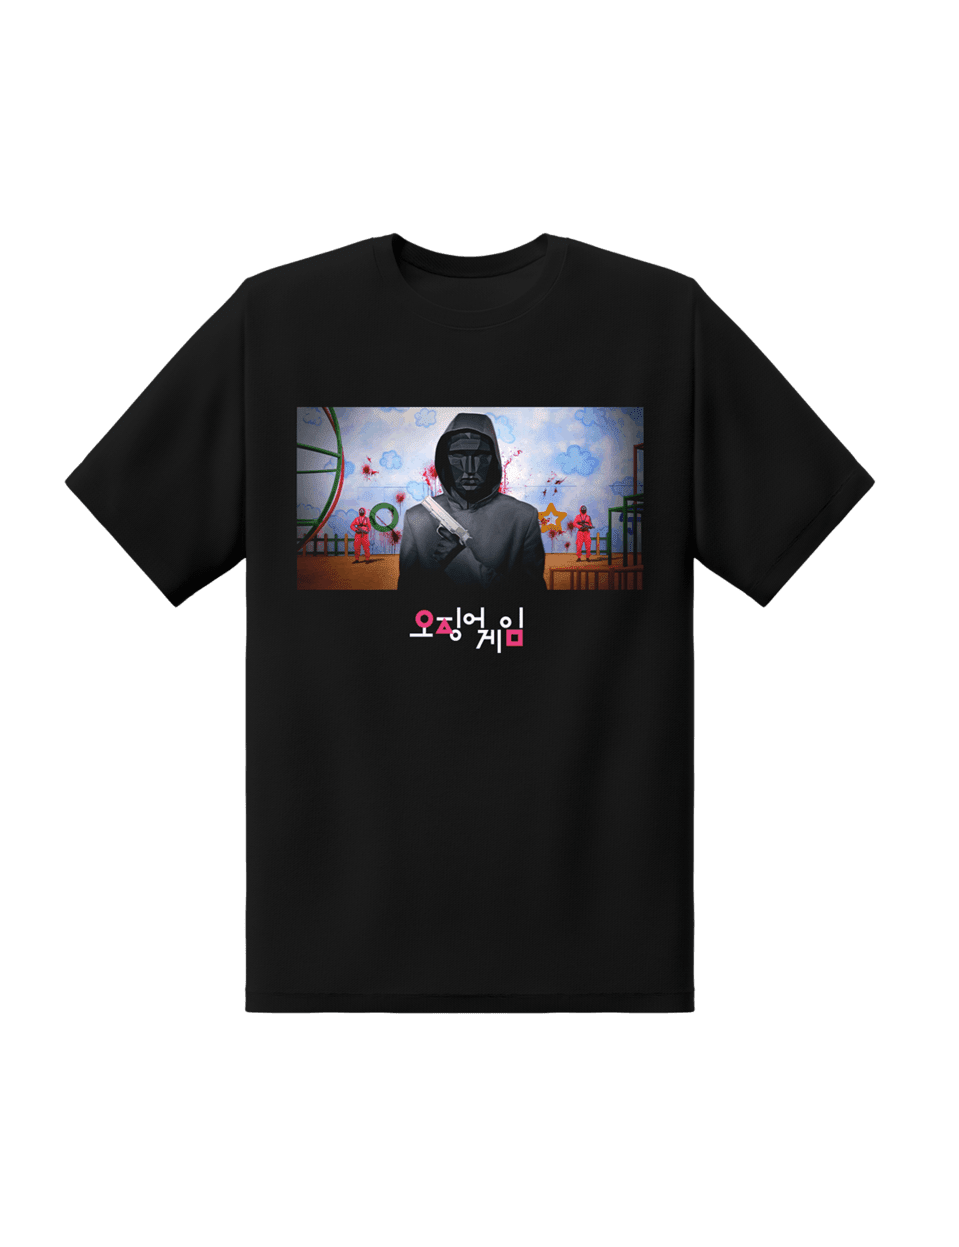 &#x27;Squid Game&#x27; official customizable merch from Netflix.